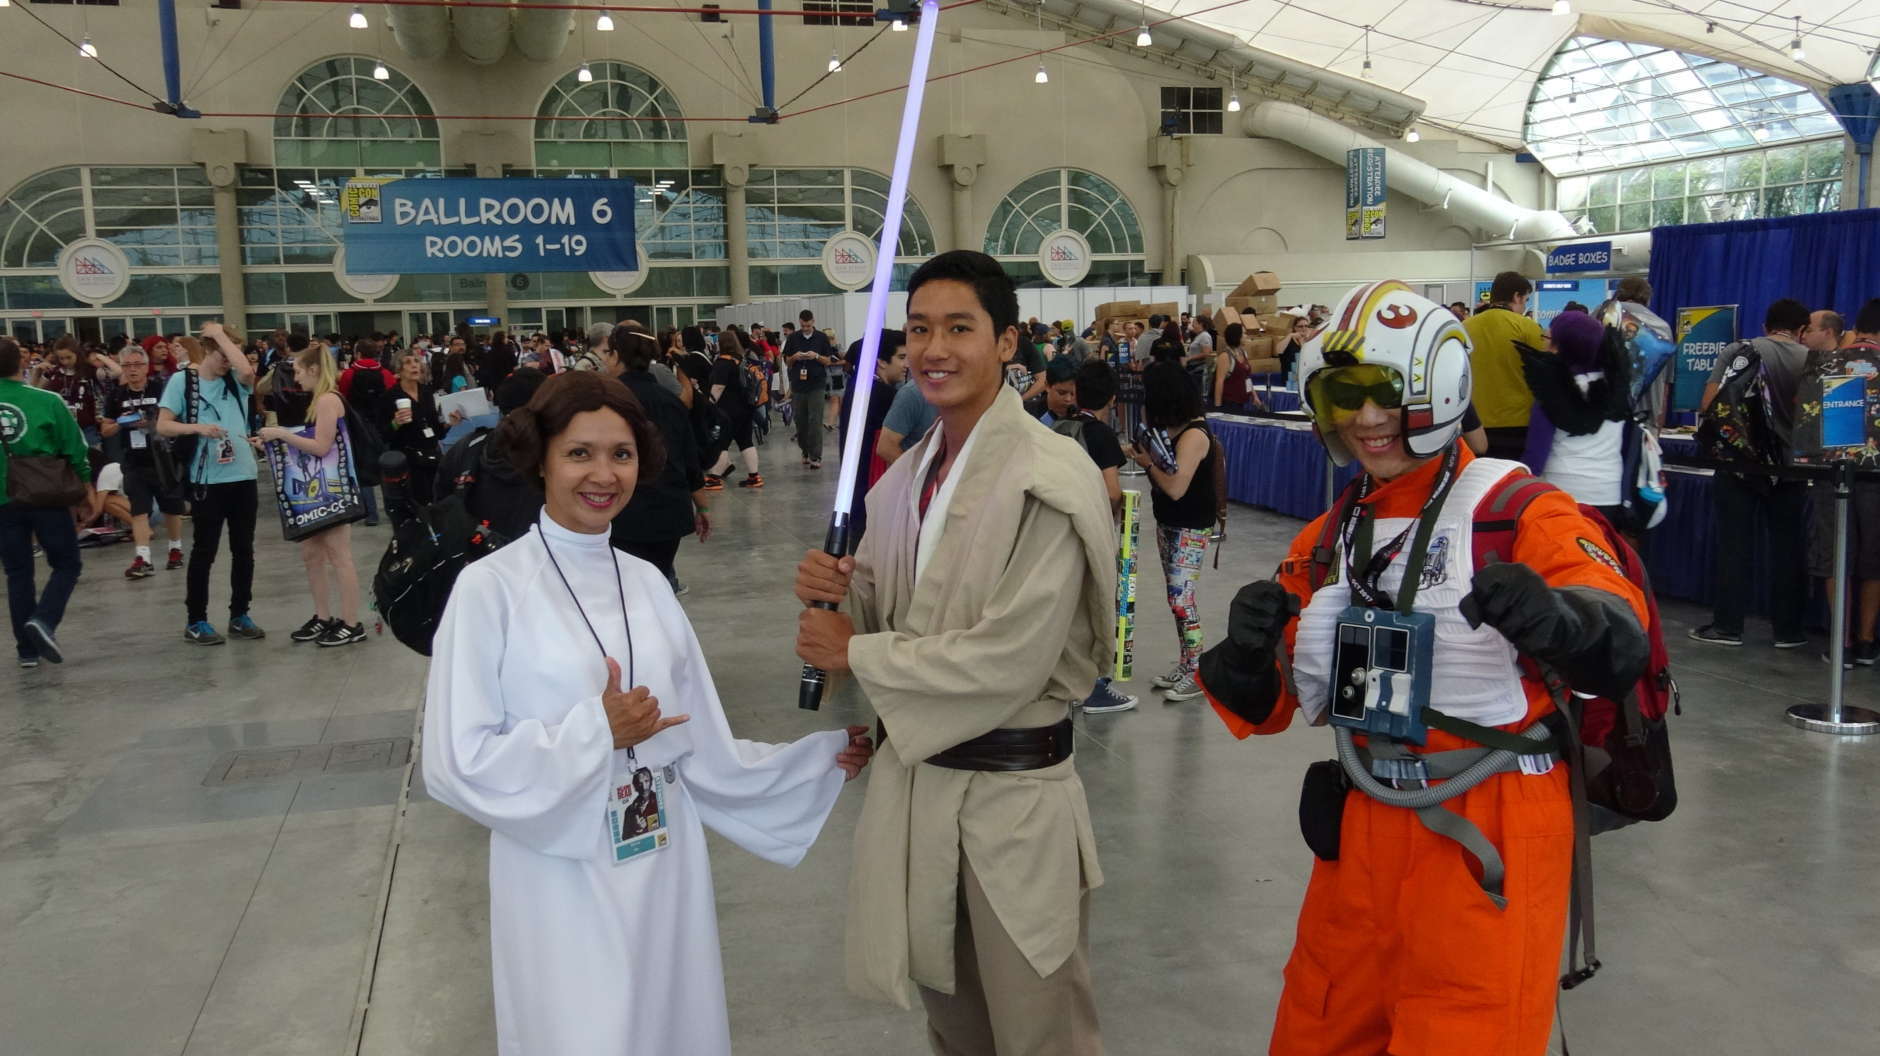 Attendees of the 2017 Comic-Con don "Star Wars" costumes. (Courtesy Kenny Fried)